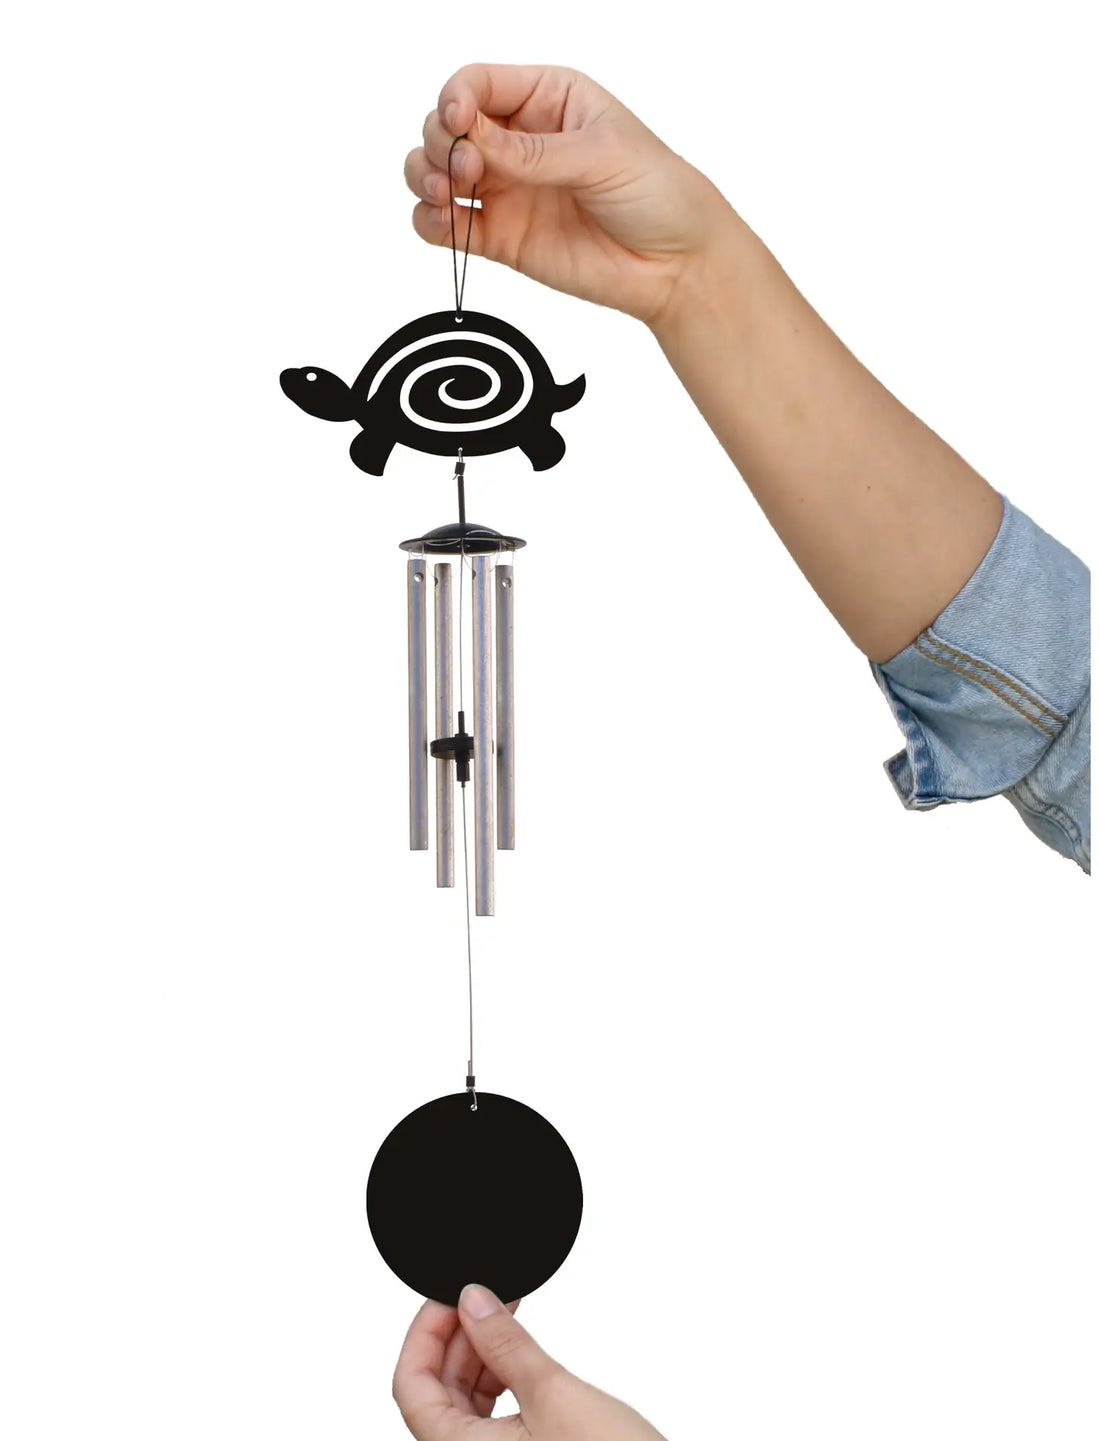 Jacob's Silhouette Wind Chime, Turtle